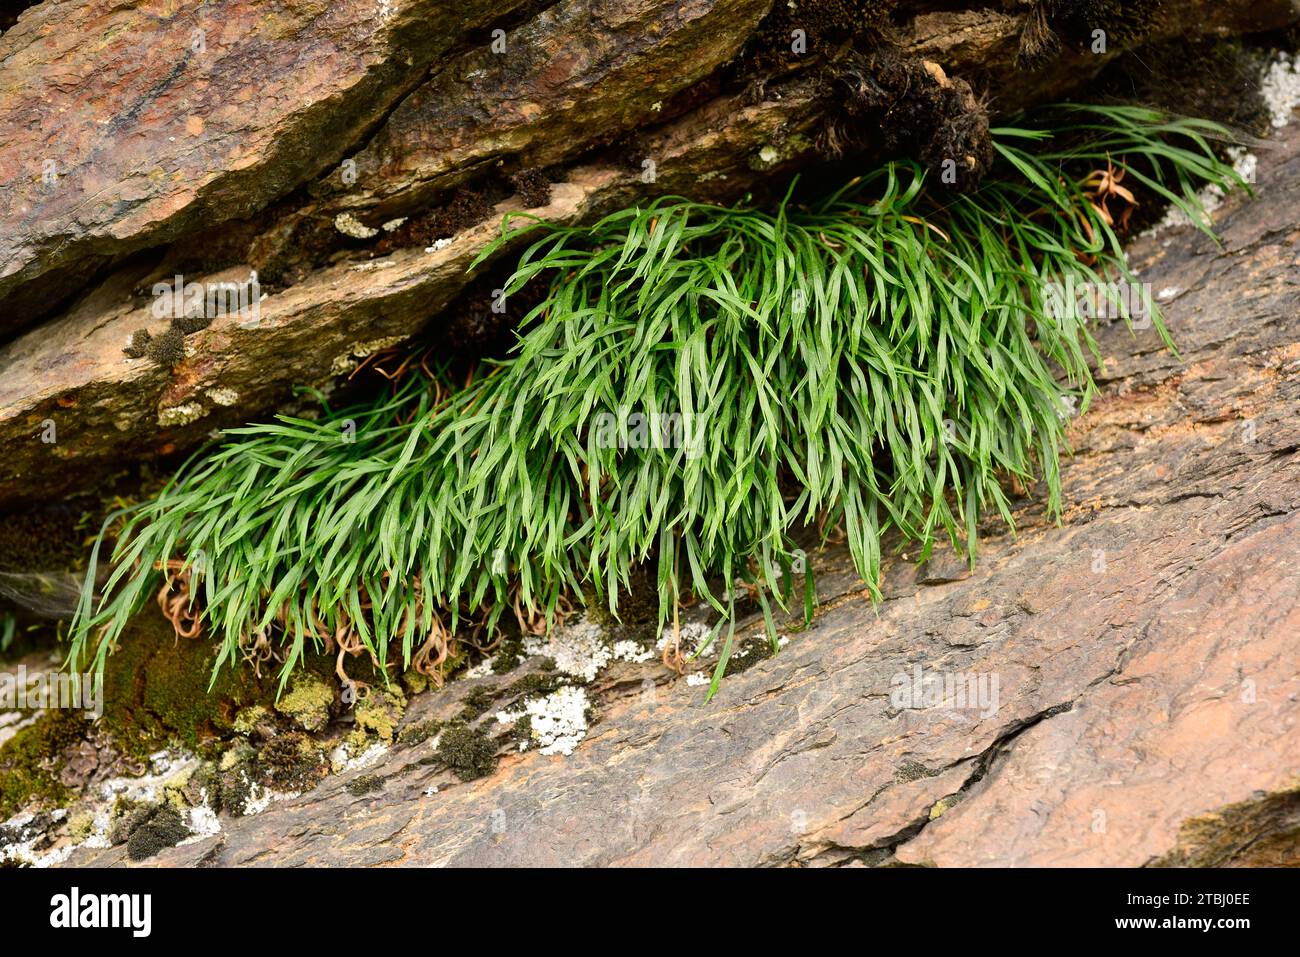 Forked splennwort (Asplenium septentrionale) is a fern native to Eurasia and western North America. This photo was taken in Andorra. Stock Photo